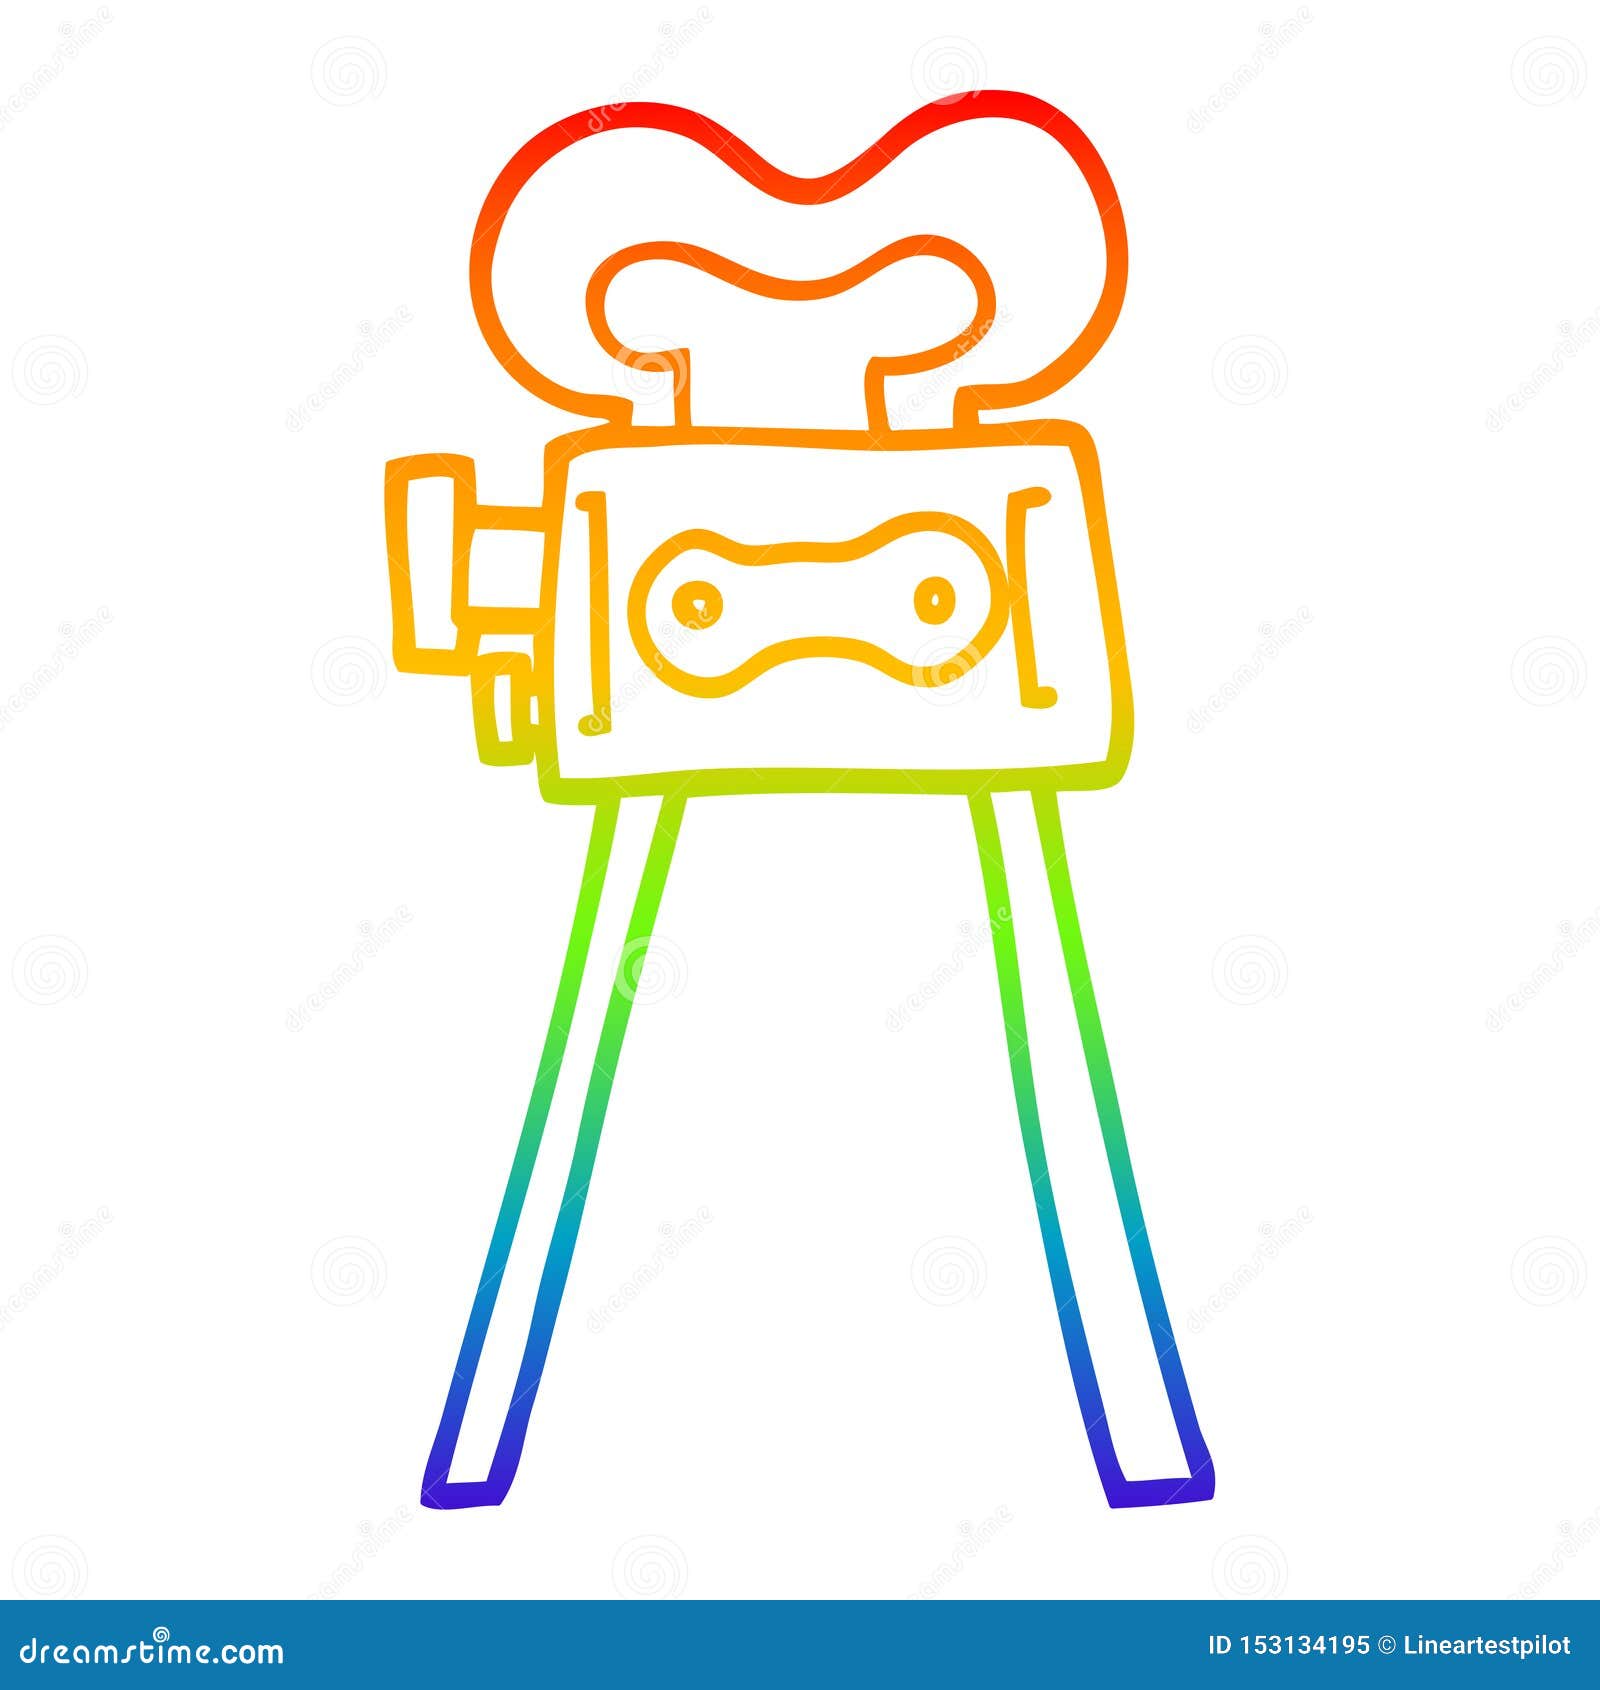 A Creative Rainbow Gradient Line Drawing Cartoon Film Camera Stock Vector -  Illustration of clipart, traditional: 153134195